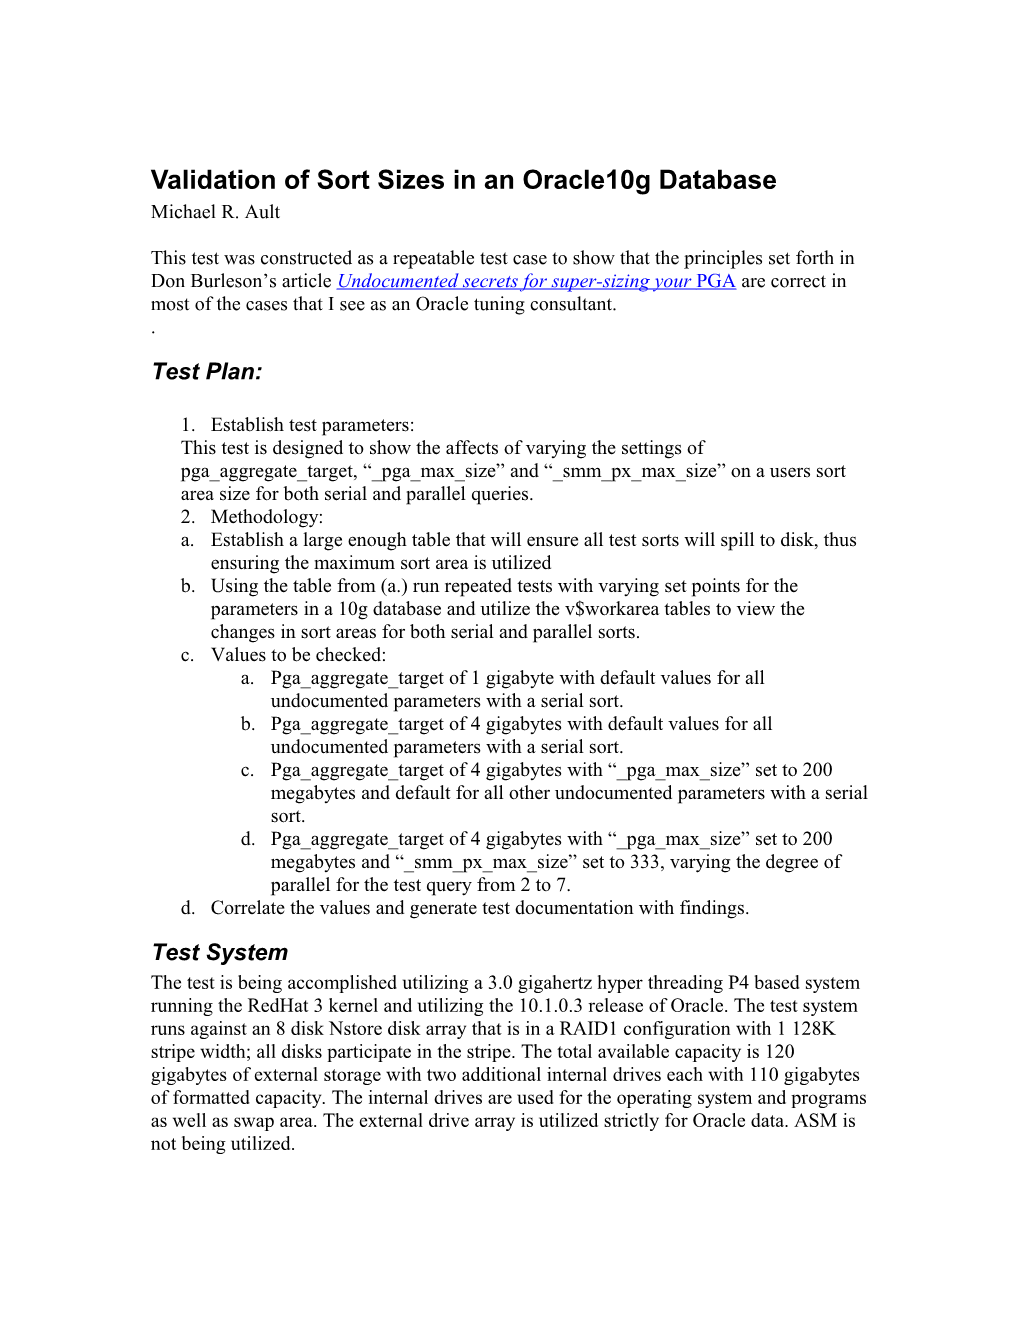 Validation of Sort Sizes in an Oracle10g Database